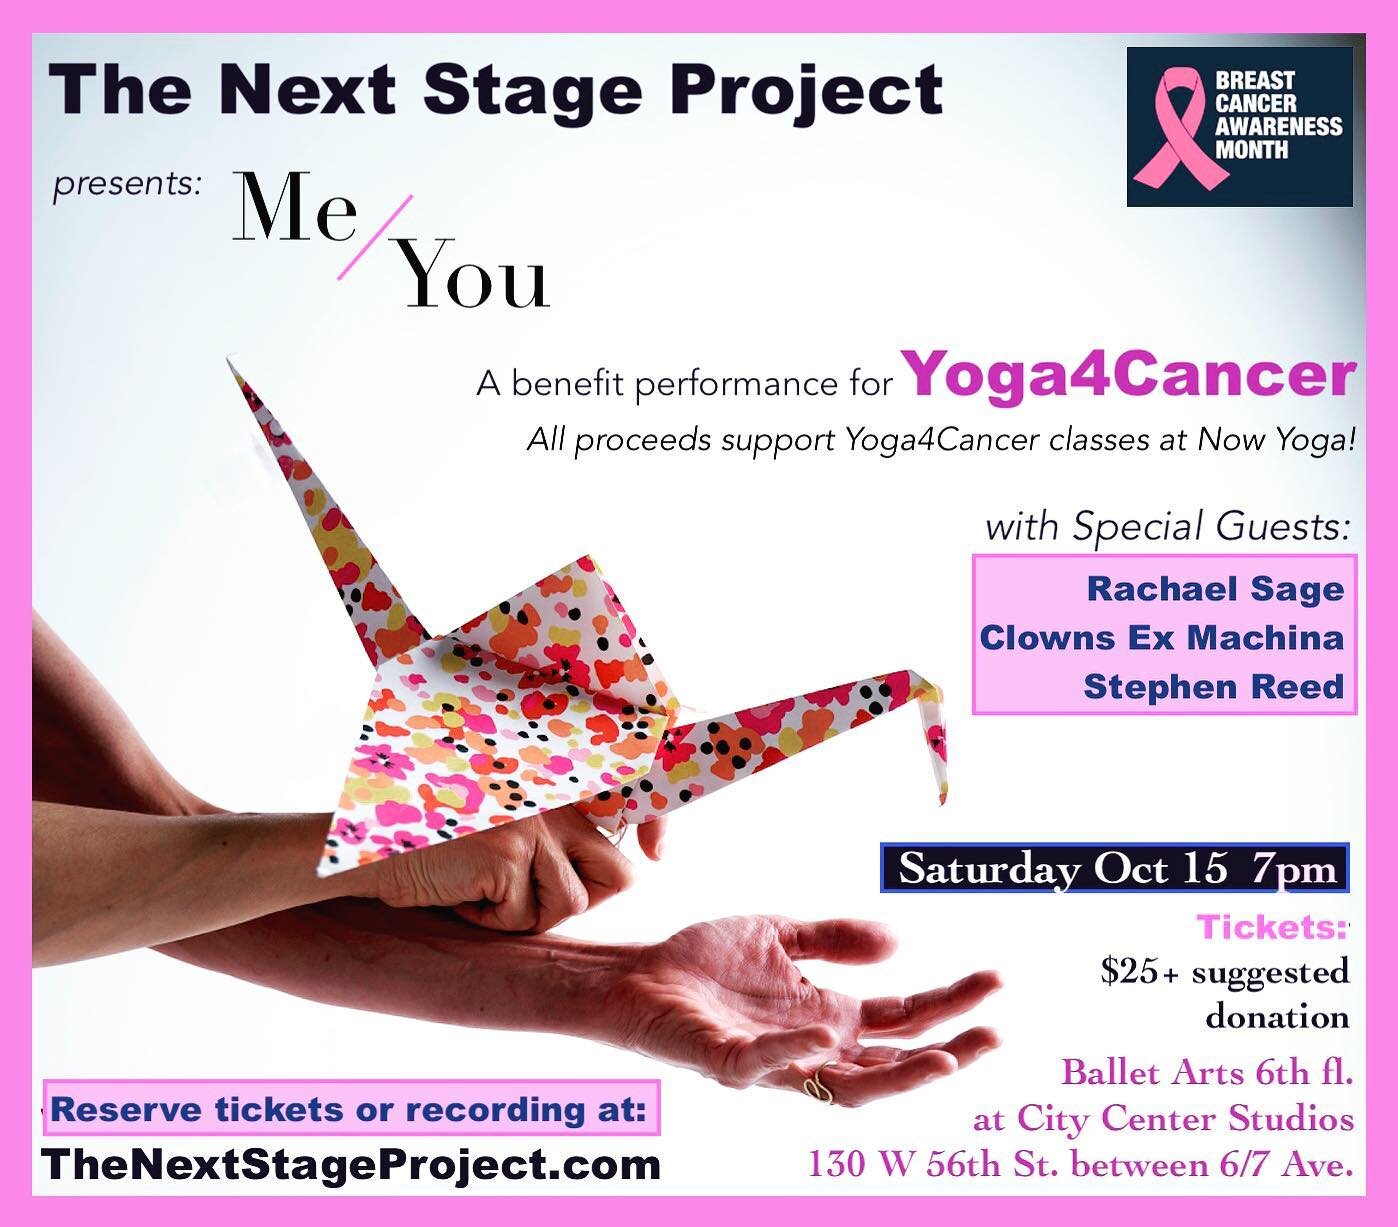 please join us for an evening of dance and music in support of @yoga4cancer classes at now yoga, which are made entirely possible by the efforts and commitment of our beloved teacher @janahicks26 🌸 10/15 at 7pm @balletartsnyc 🎟 reserve to attend li